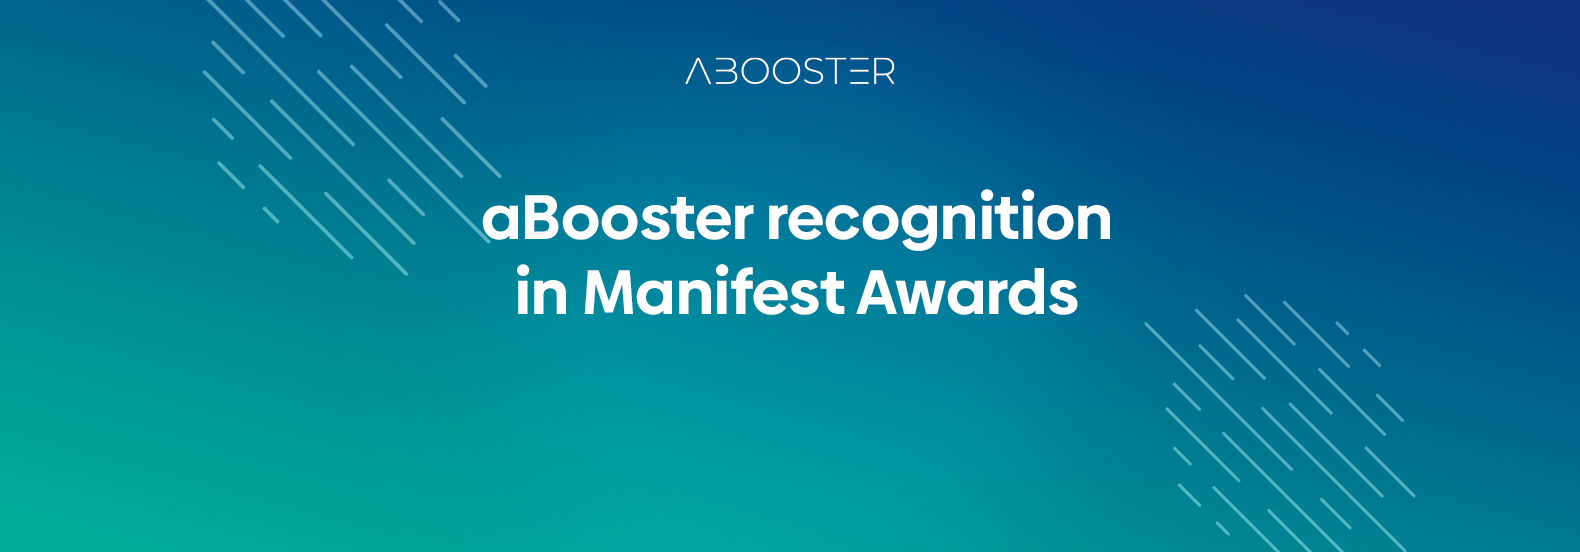 The Manifest Recognizes aBooster as one of the Most Reviewed Digital Marketing Companies in Warsaw